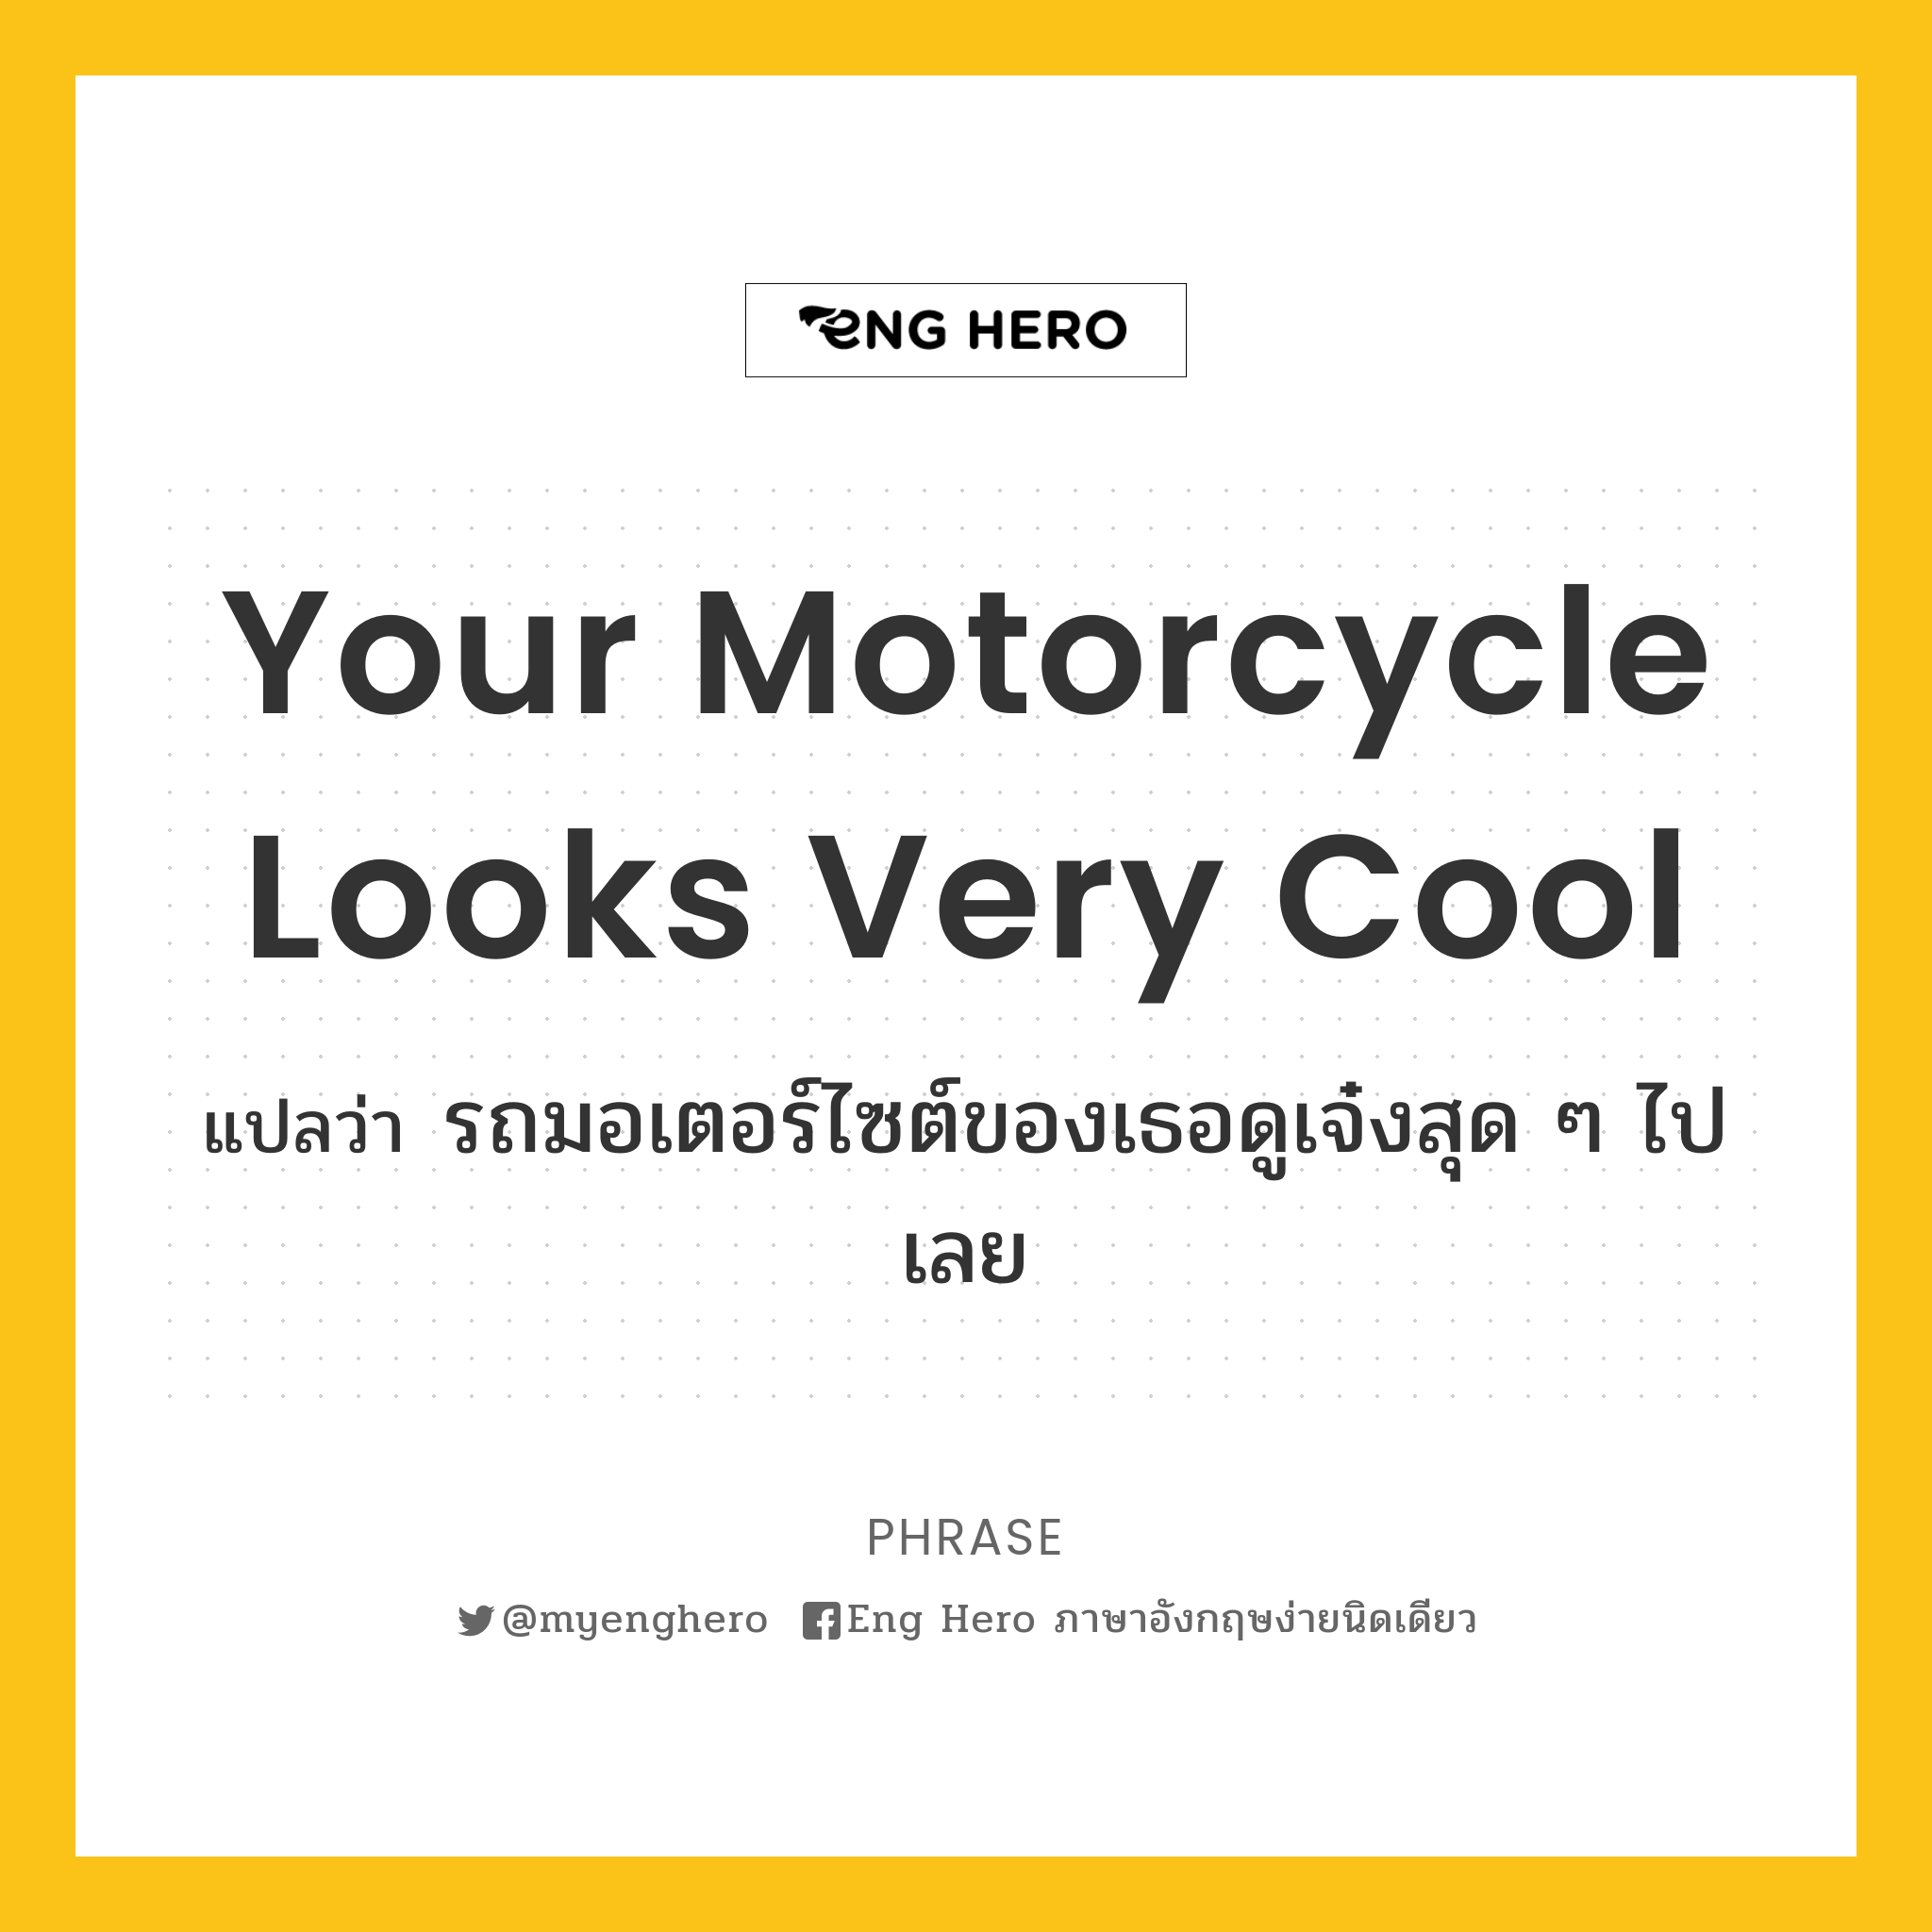 Your motorcycle looks very cool